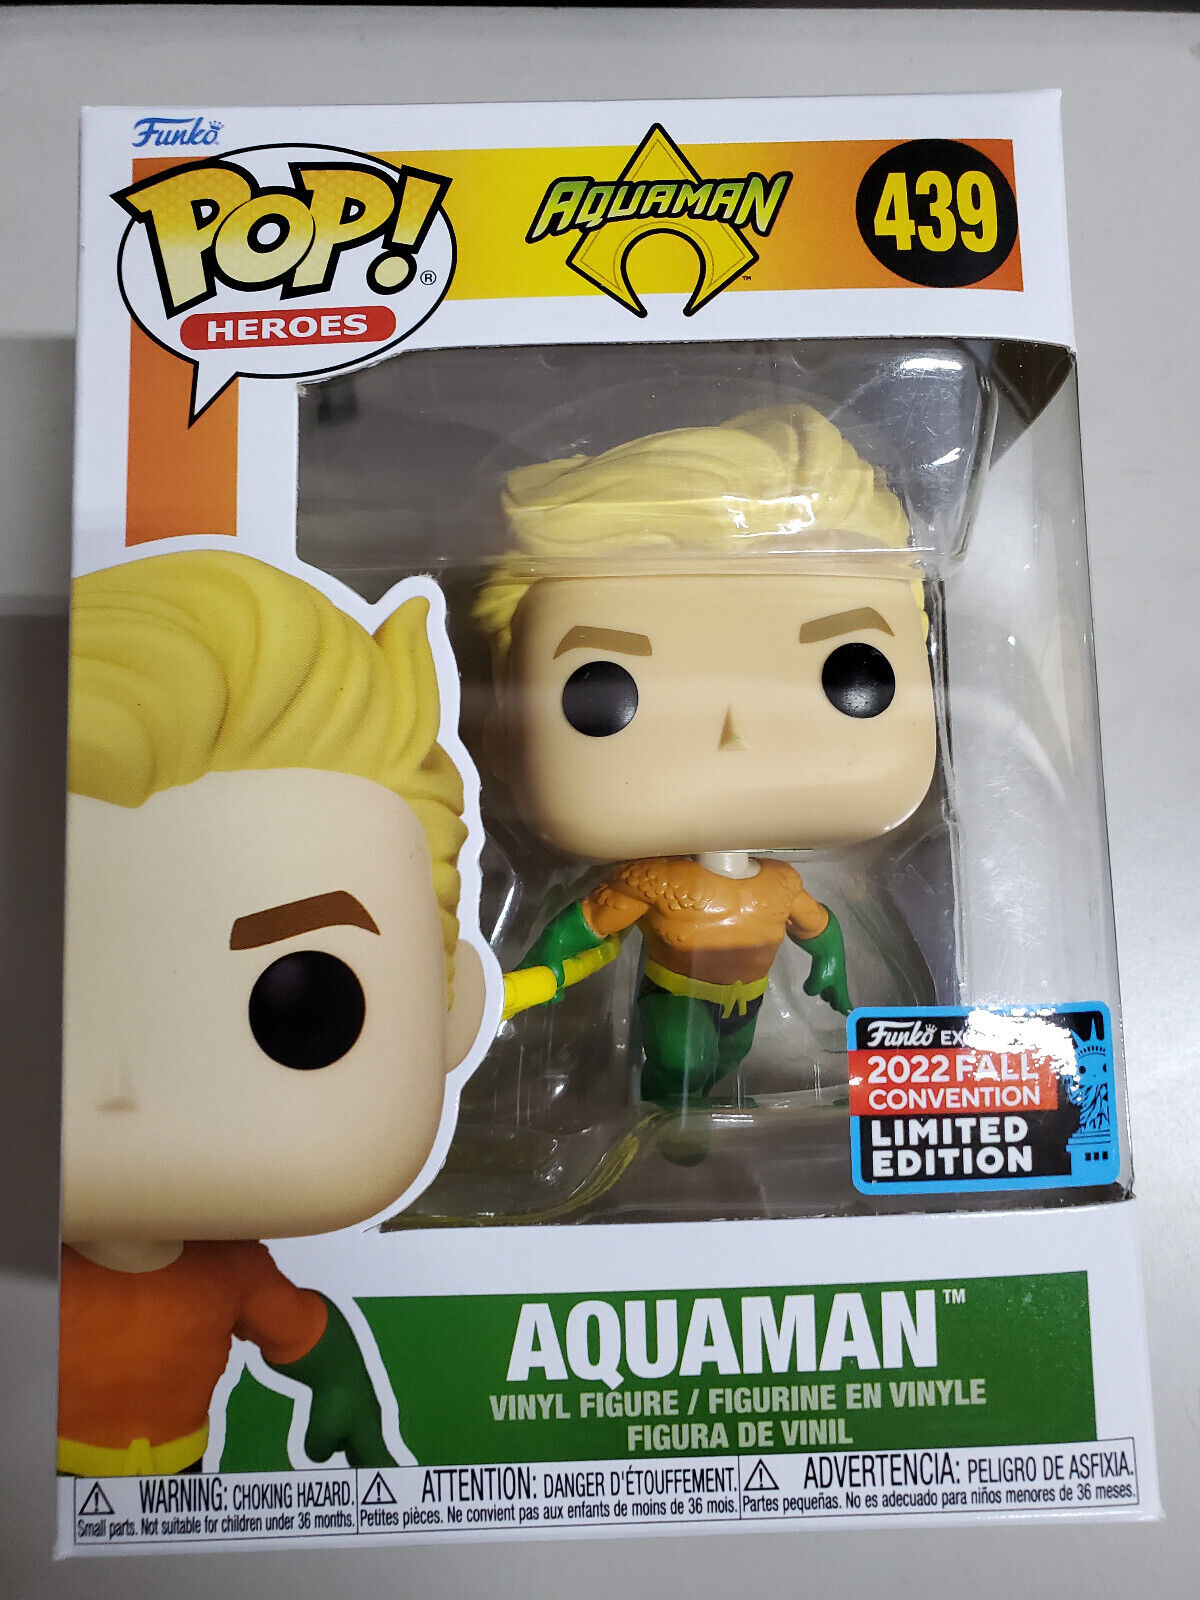 Funko Pop DC Heroes AQUAMAN #439 NYCC 2022 OFFICIAL  Convention LIMITED EDITION